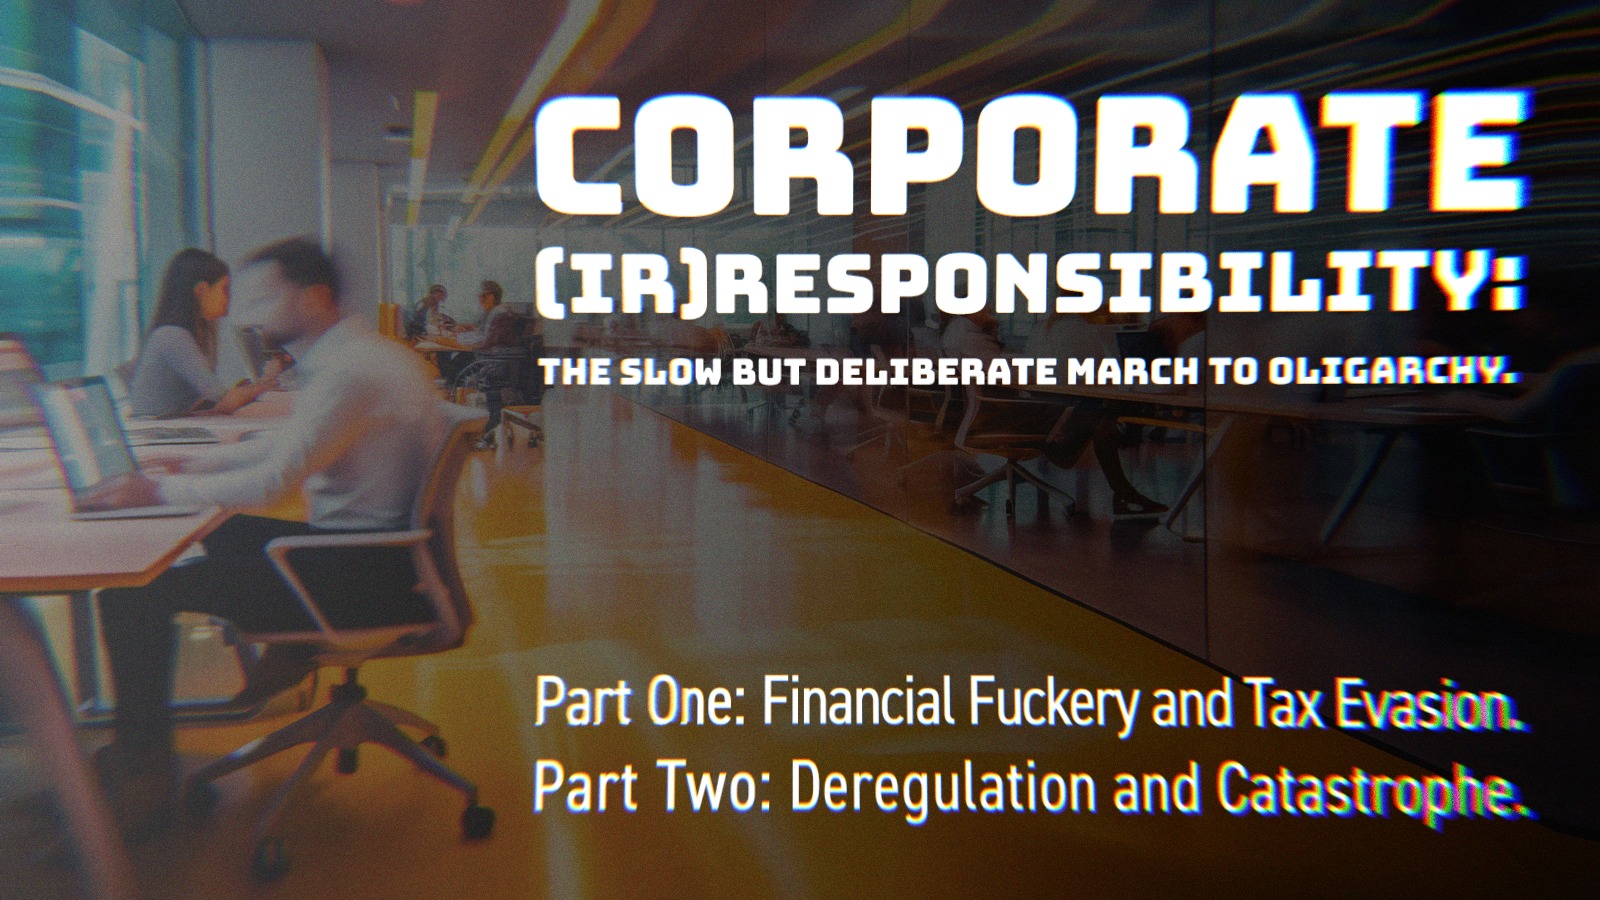 Corporate Irresponsibility-The Slow but Deliberate March to Oligarchy.